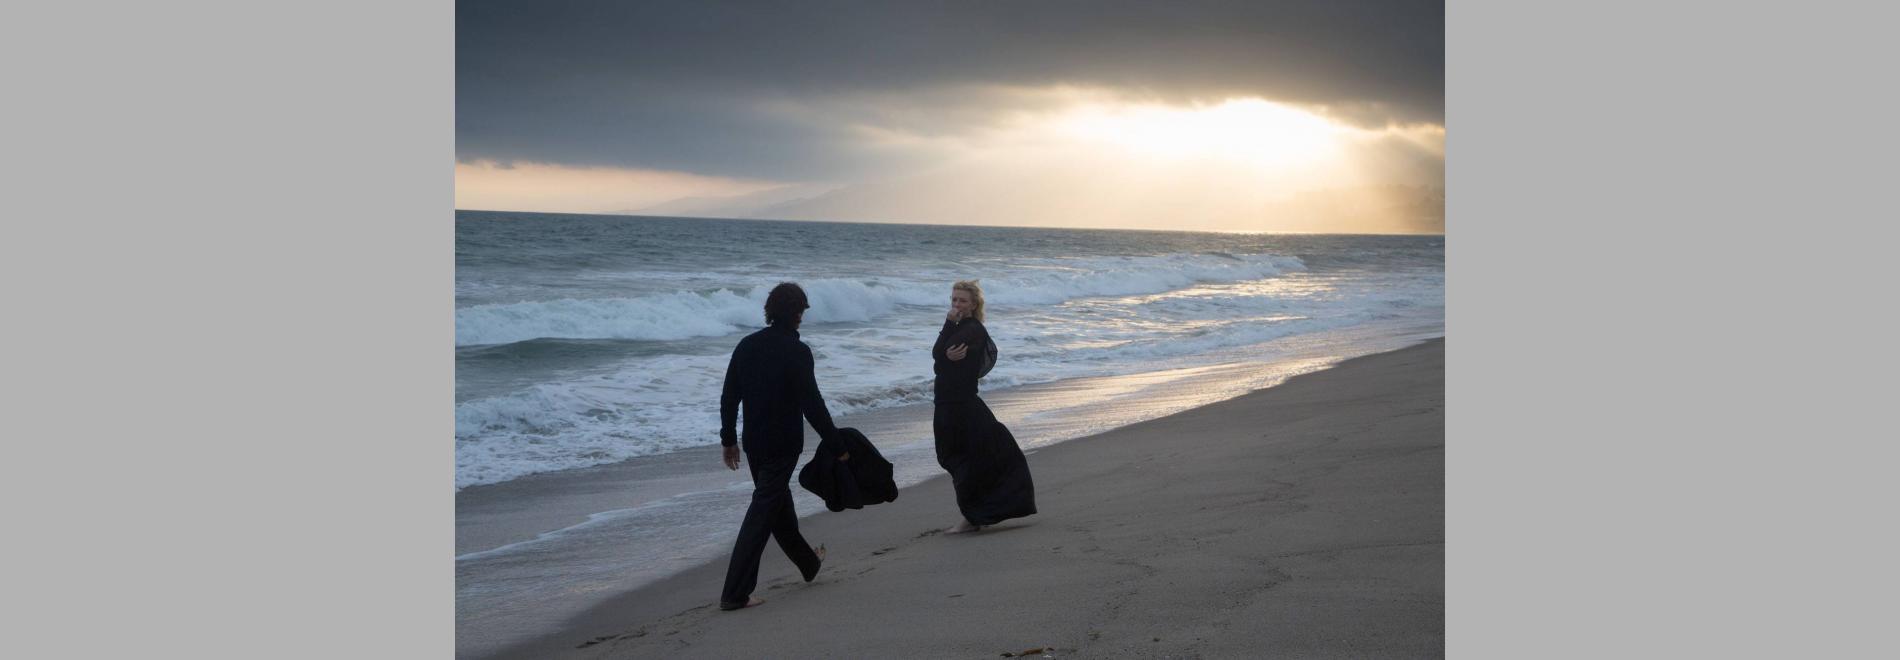 Knight of Cups (Terrence Malick, 2015)